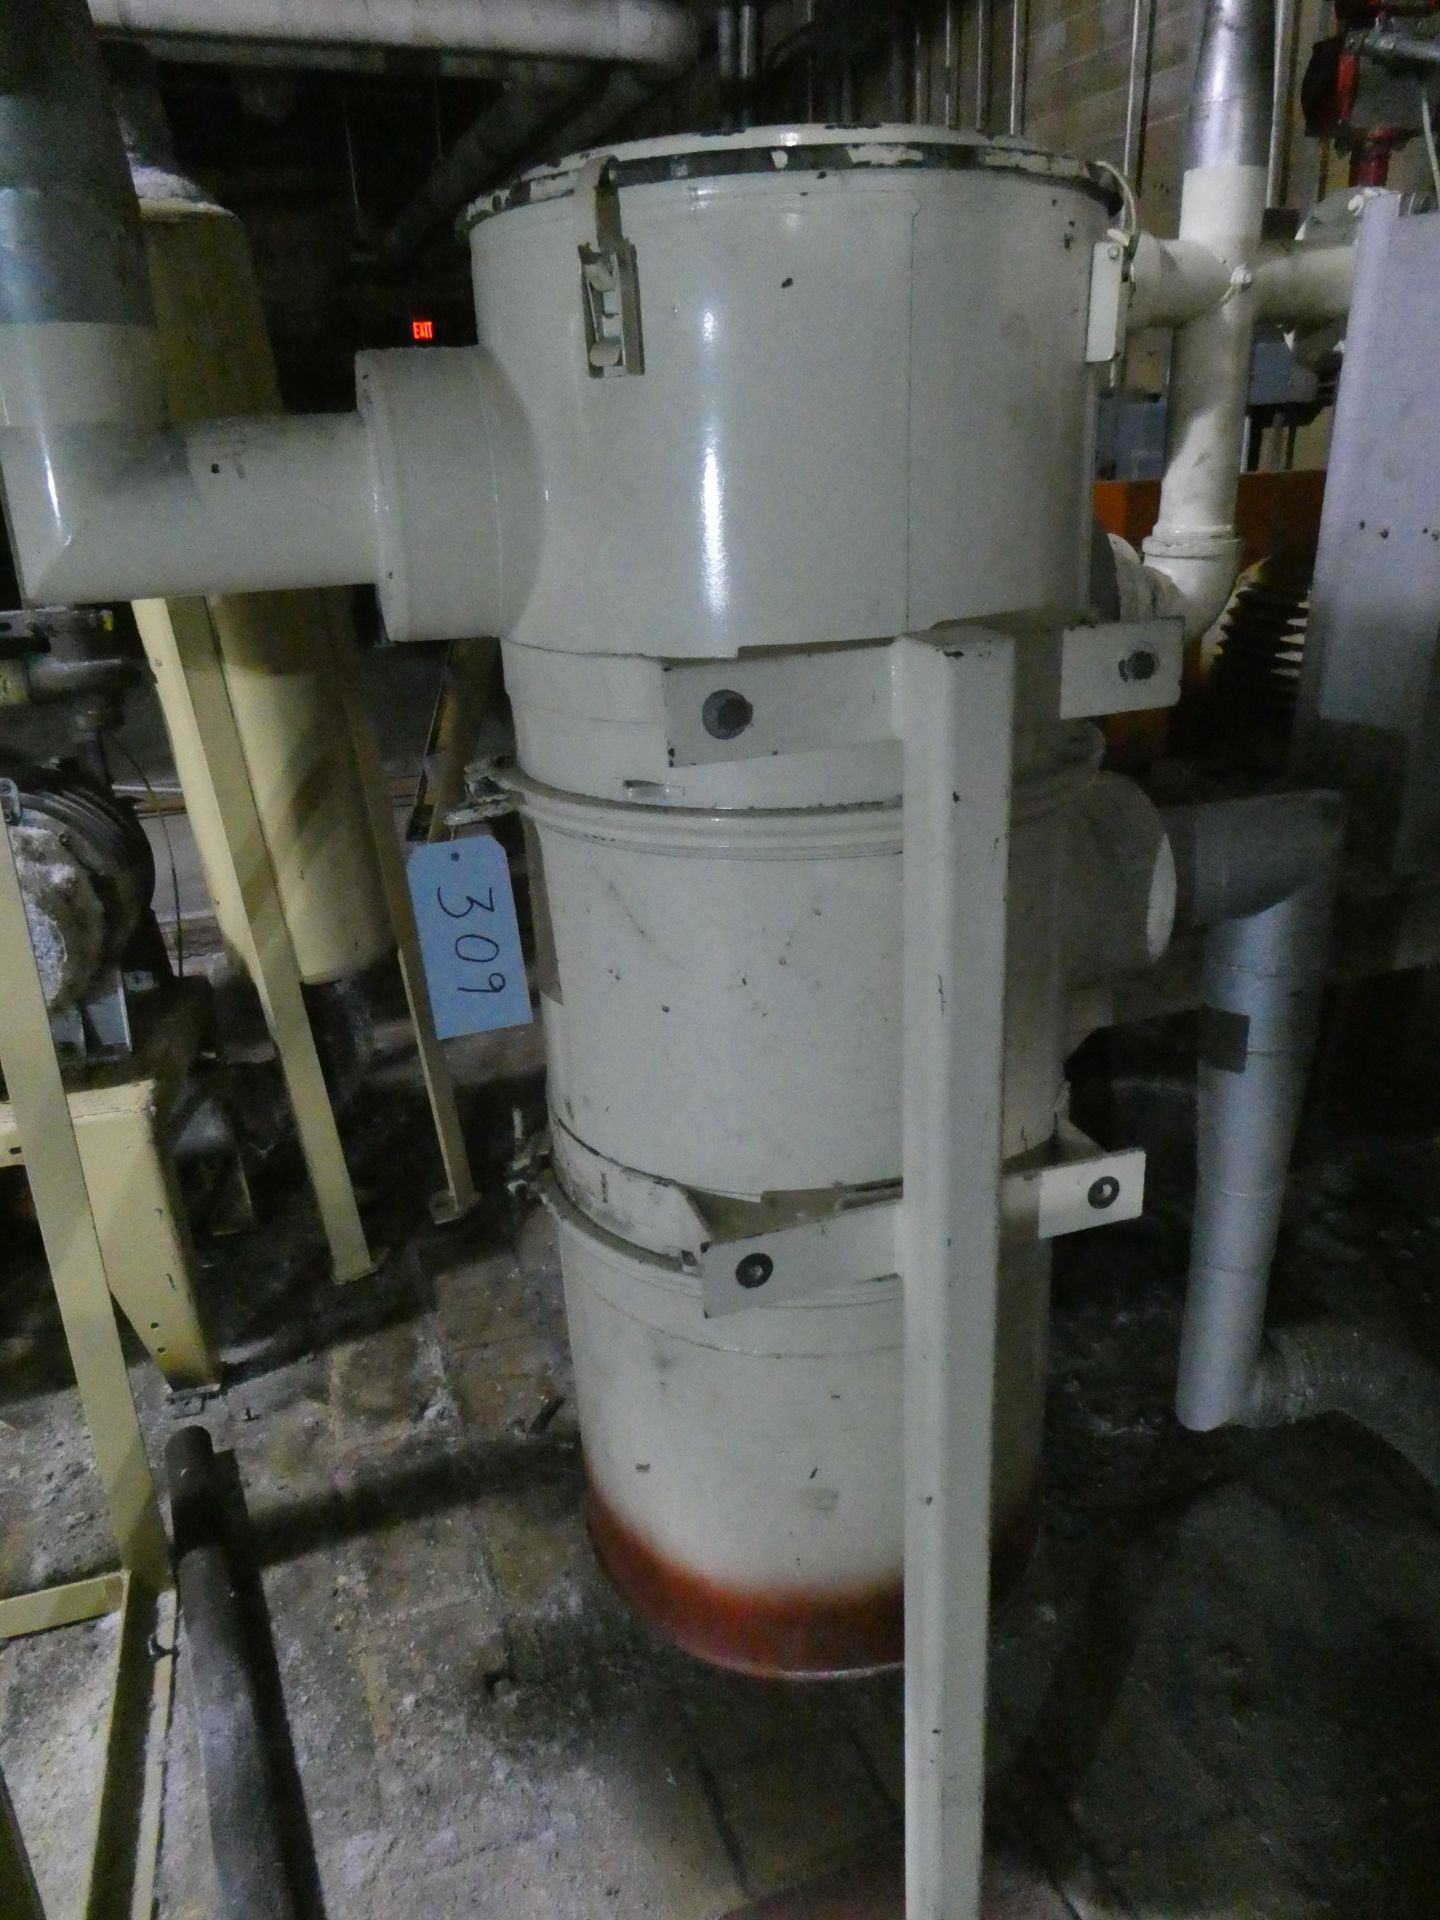 Inline Filter/Dust Collector